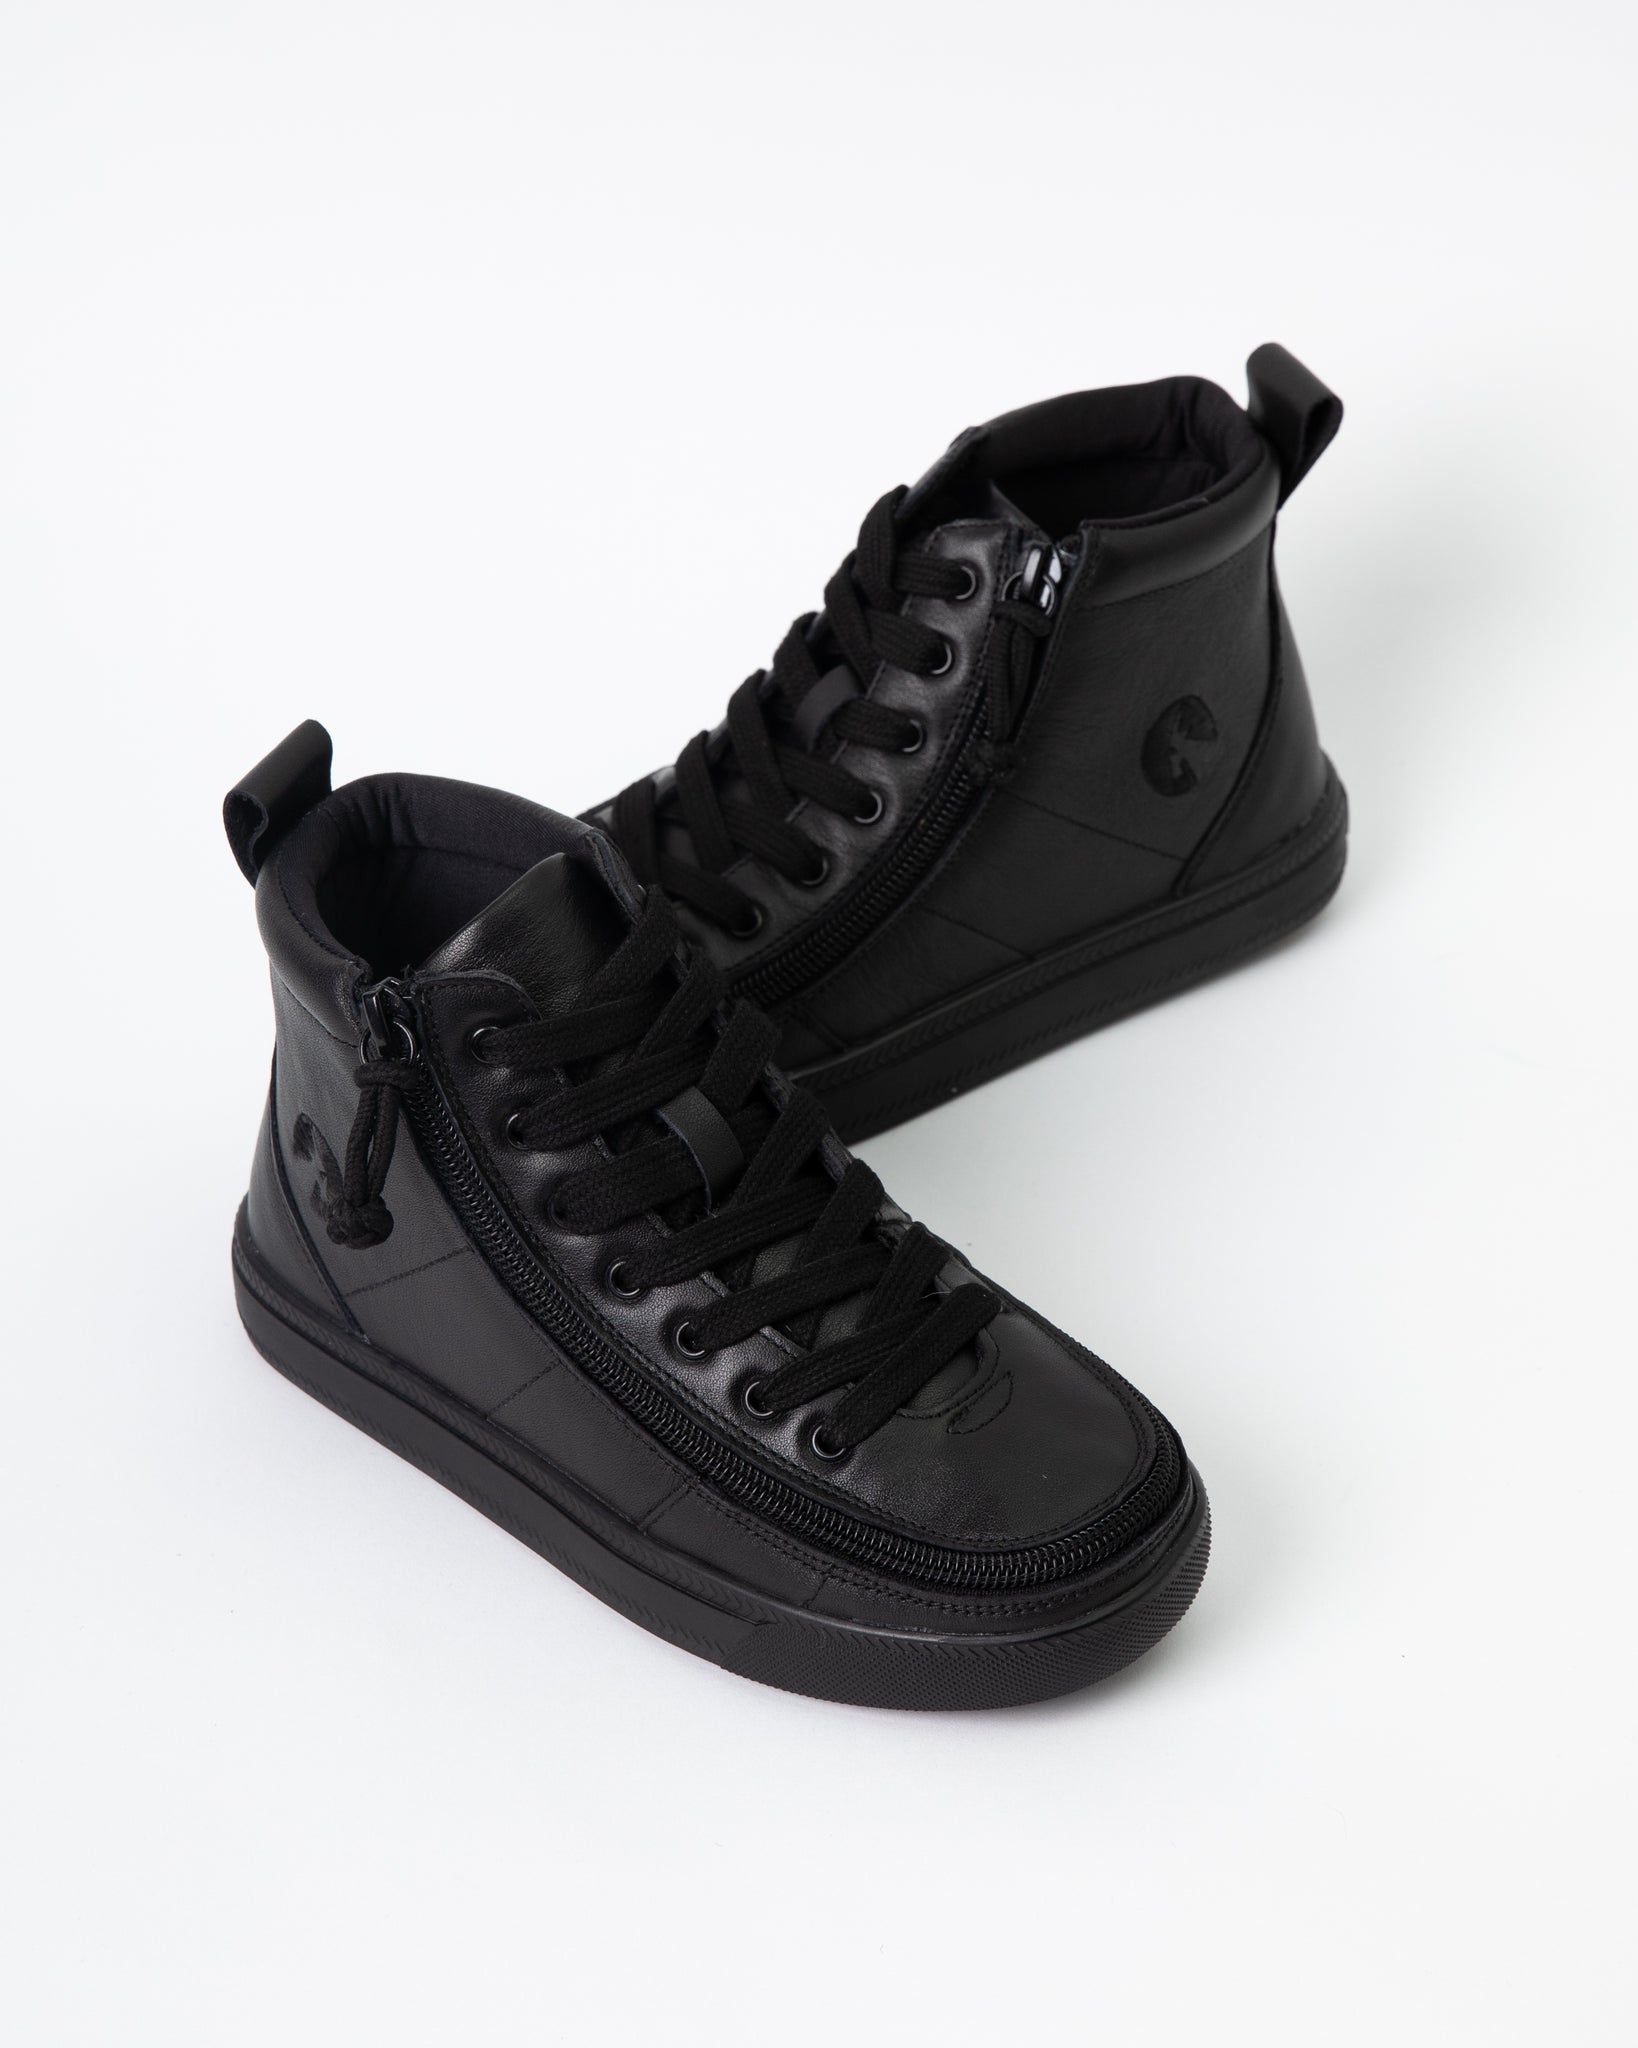 DR II High Top (Toddler) - Black to the Floor Leather